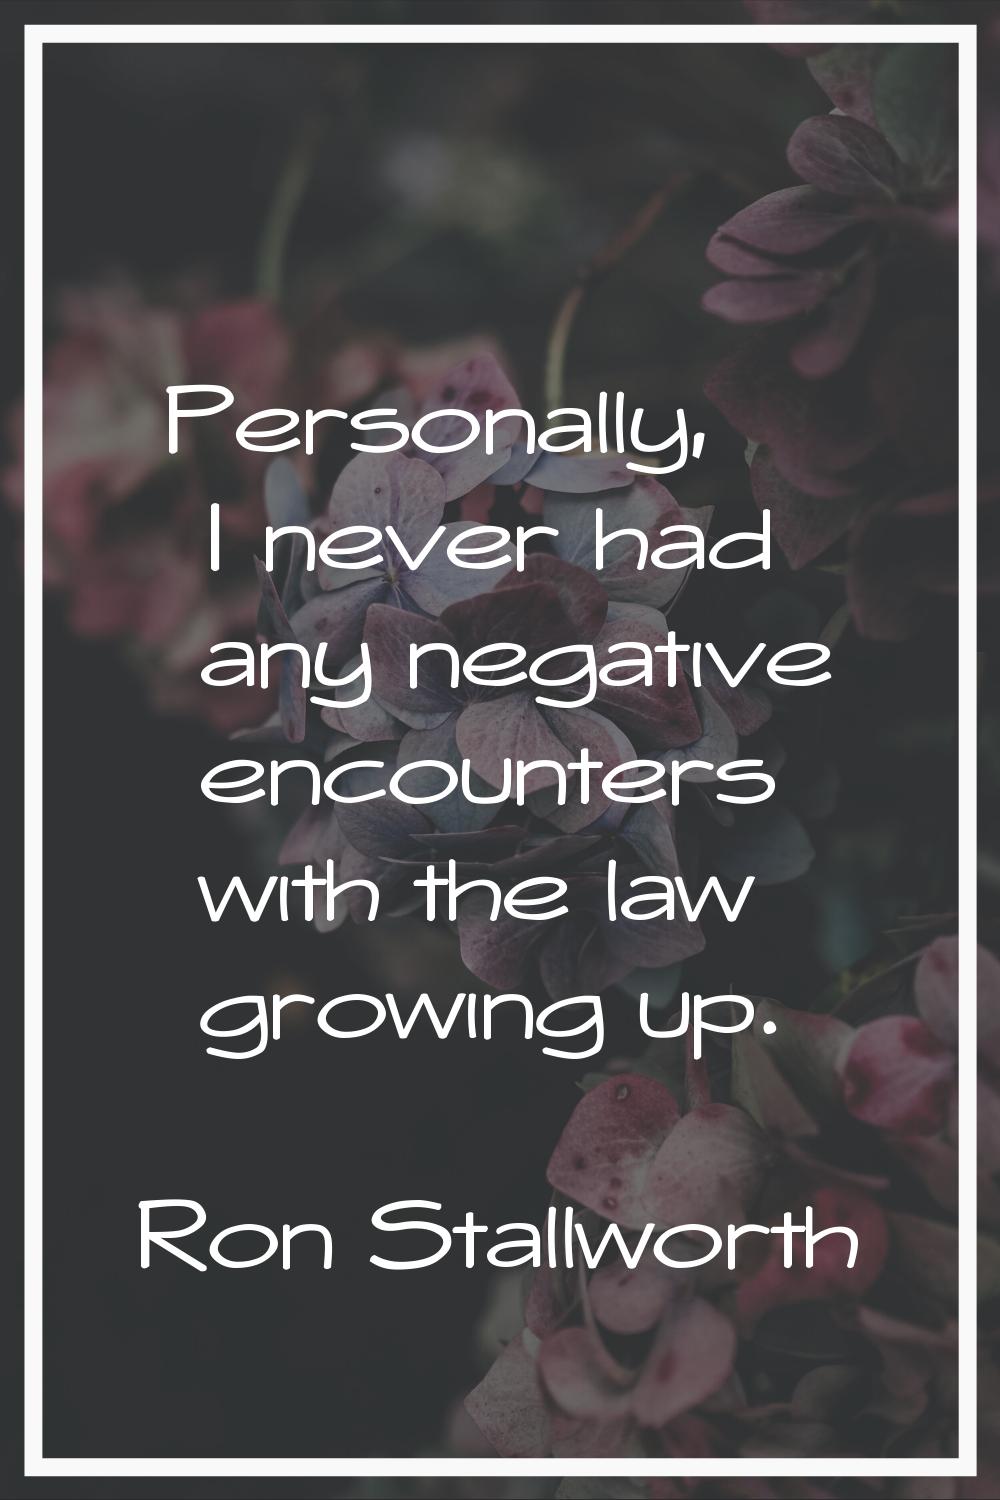 Personally, I never had any negative encounters with the law growing up.